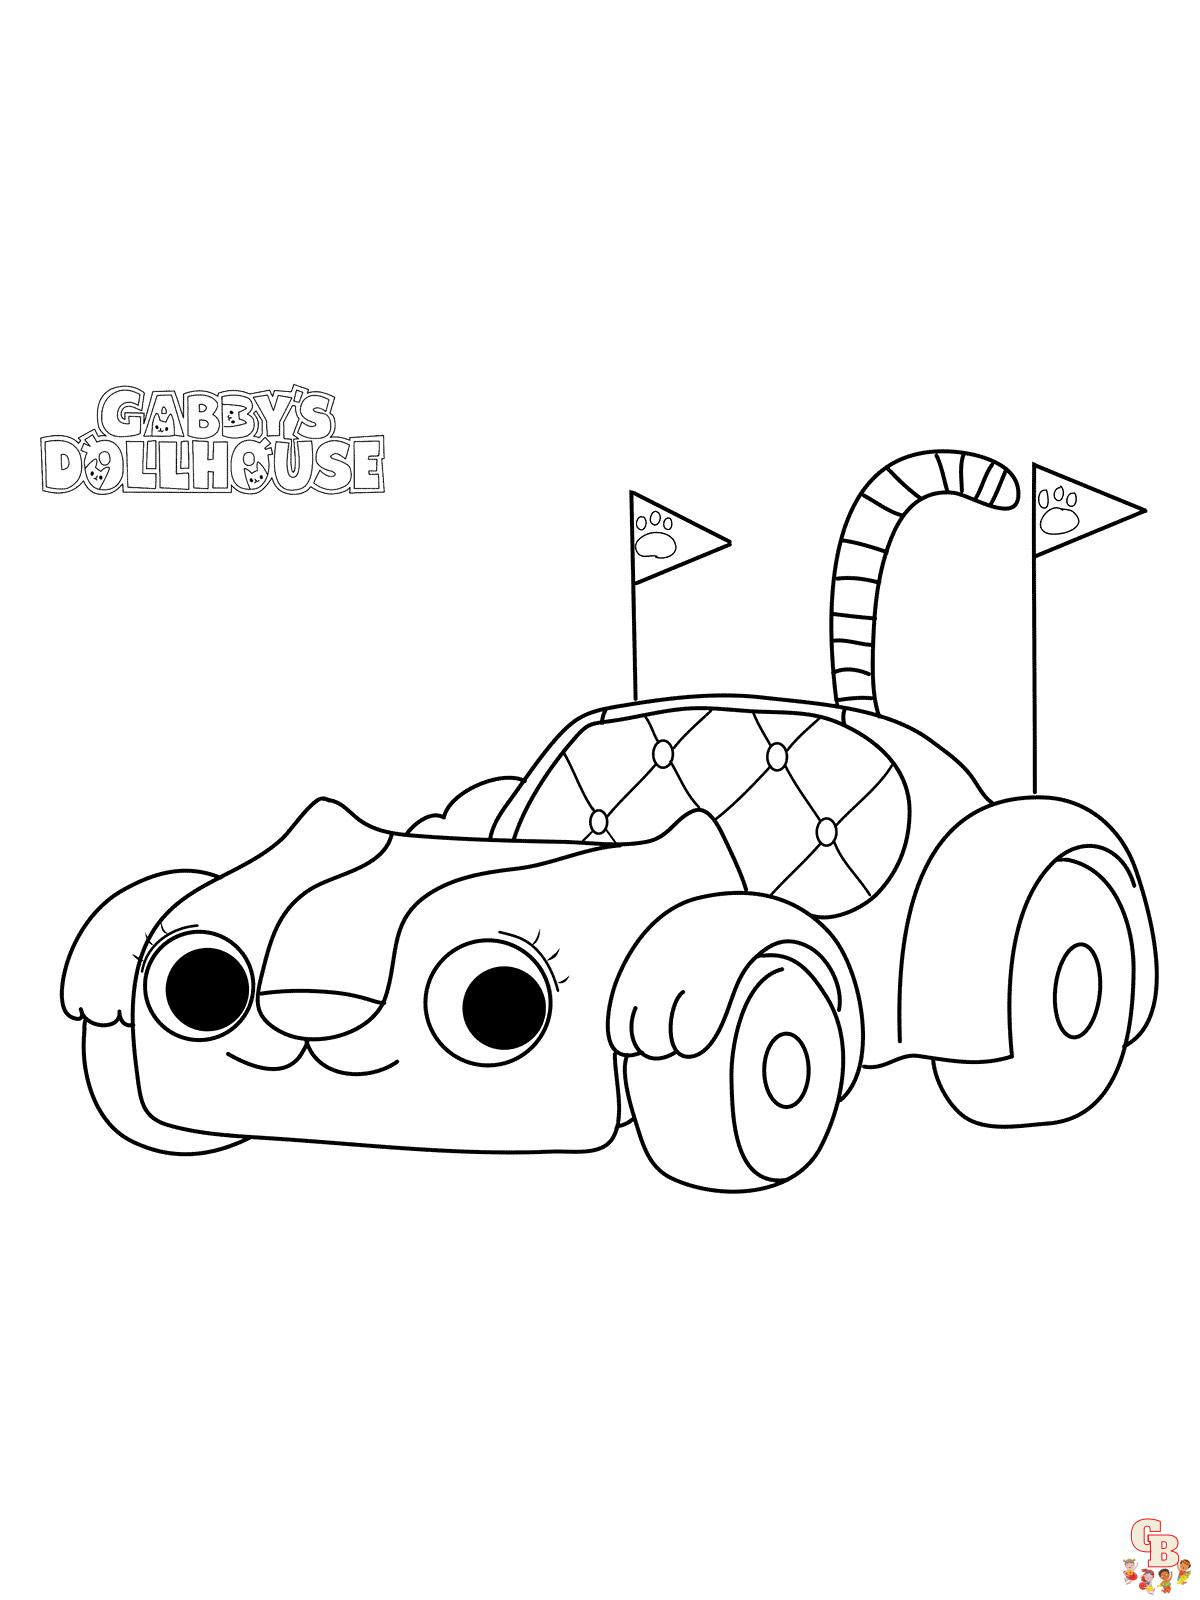 Gabby Dollhouse Coloring Pages 16